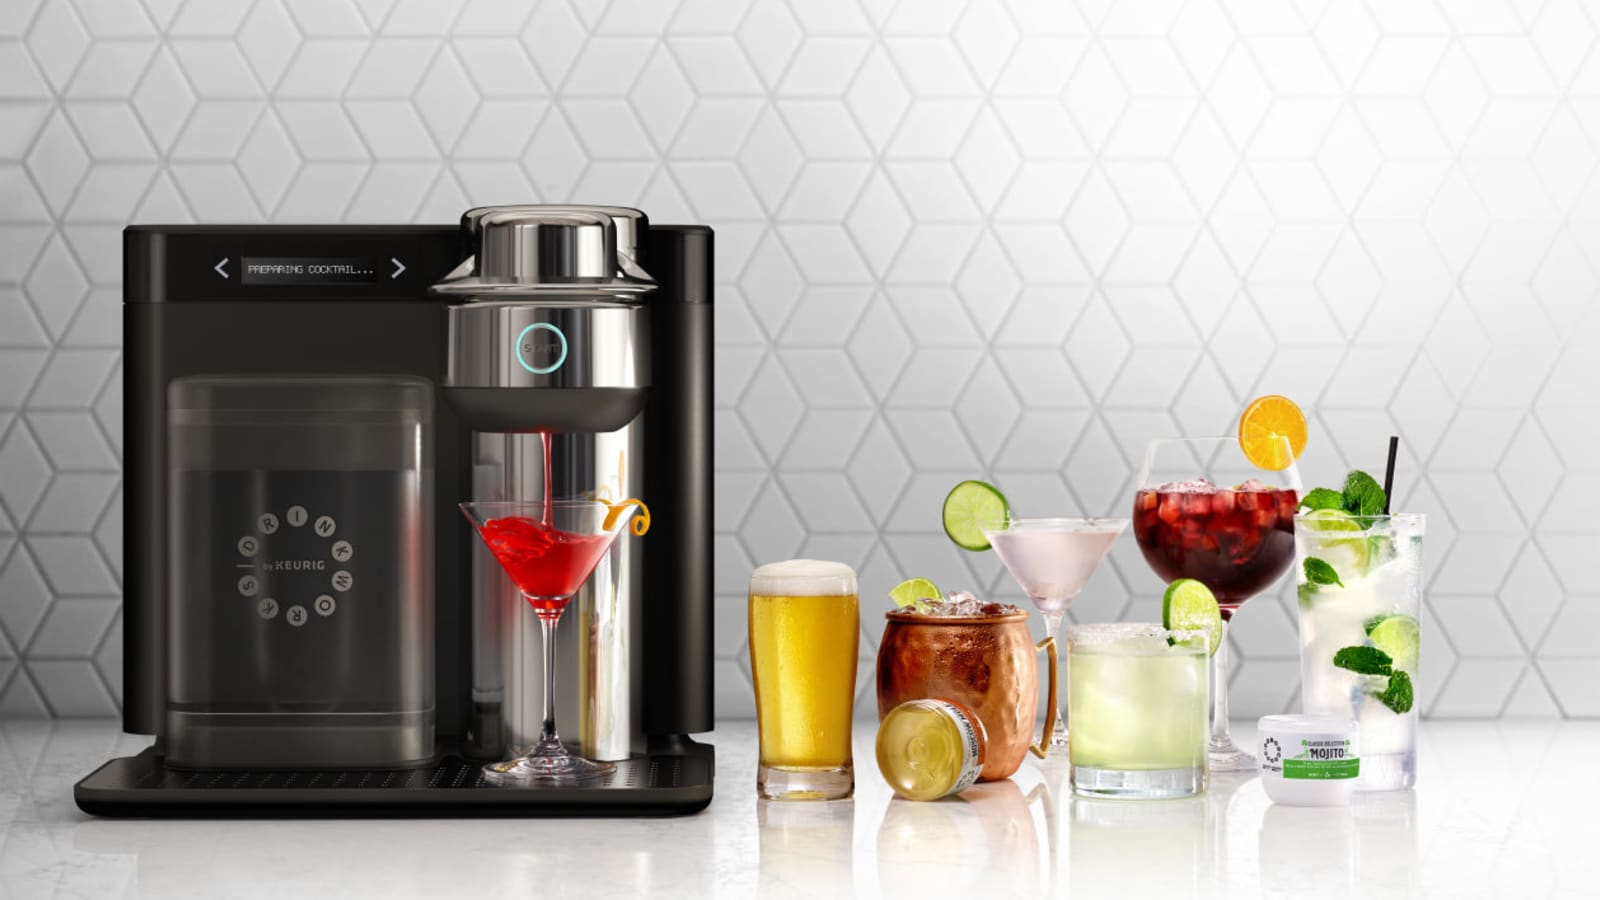 Keurig new SMART brewers offer a mind-blowing amount of coffee drinks